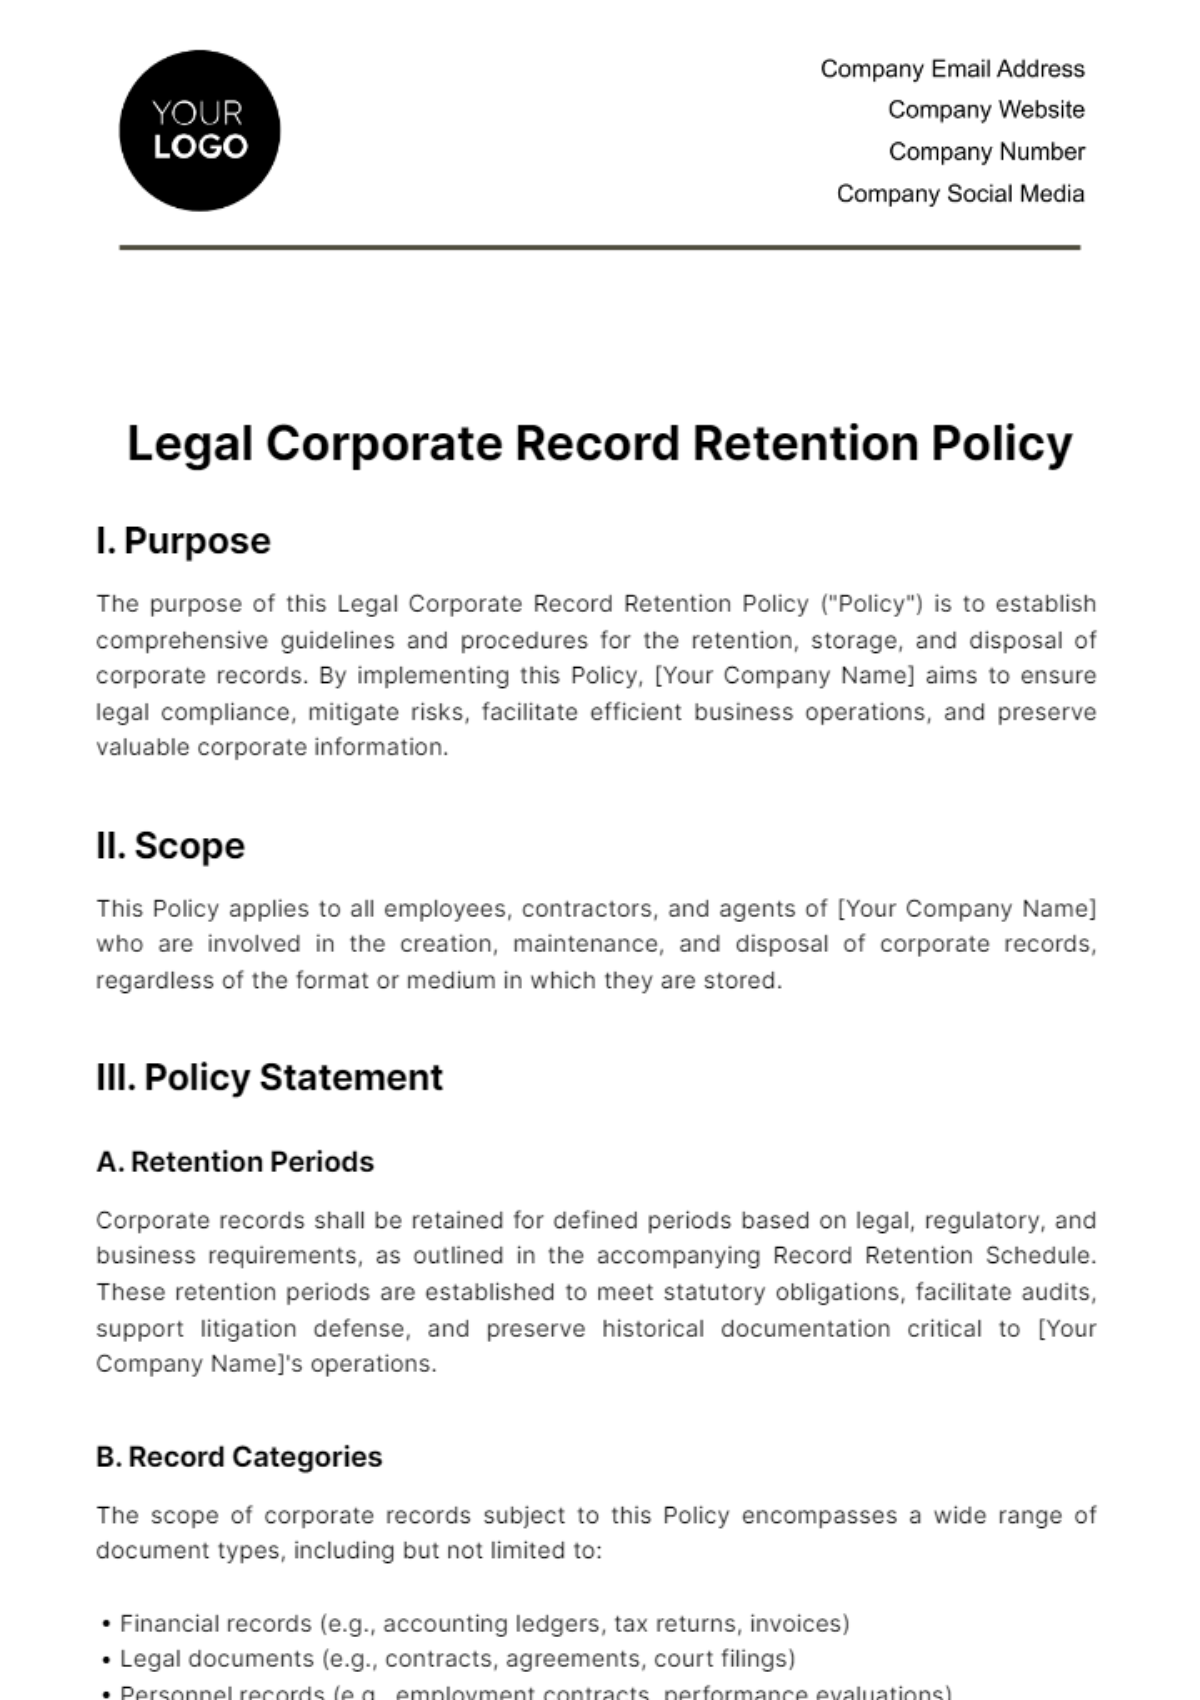 Legal Corporate Record Retention Policy Template